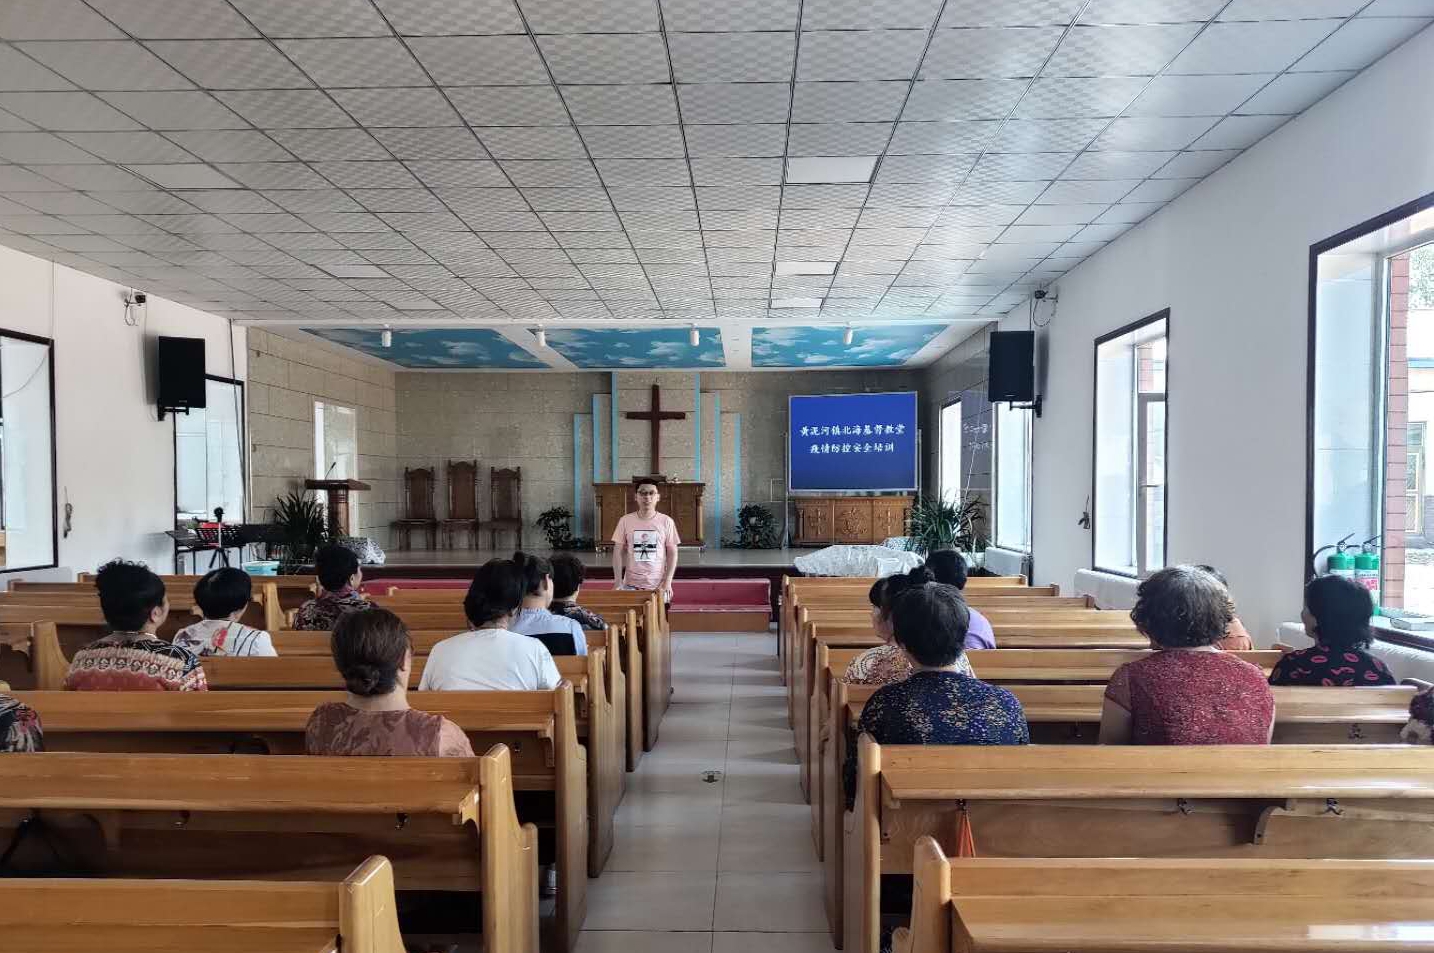 Beihai Church in Huangnihe Town, Dunhua, Jilin resumed a Sunday service on July 26 after months of lockdown due to COVID-19.